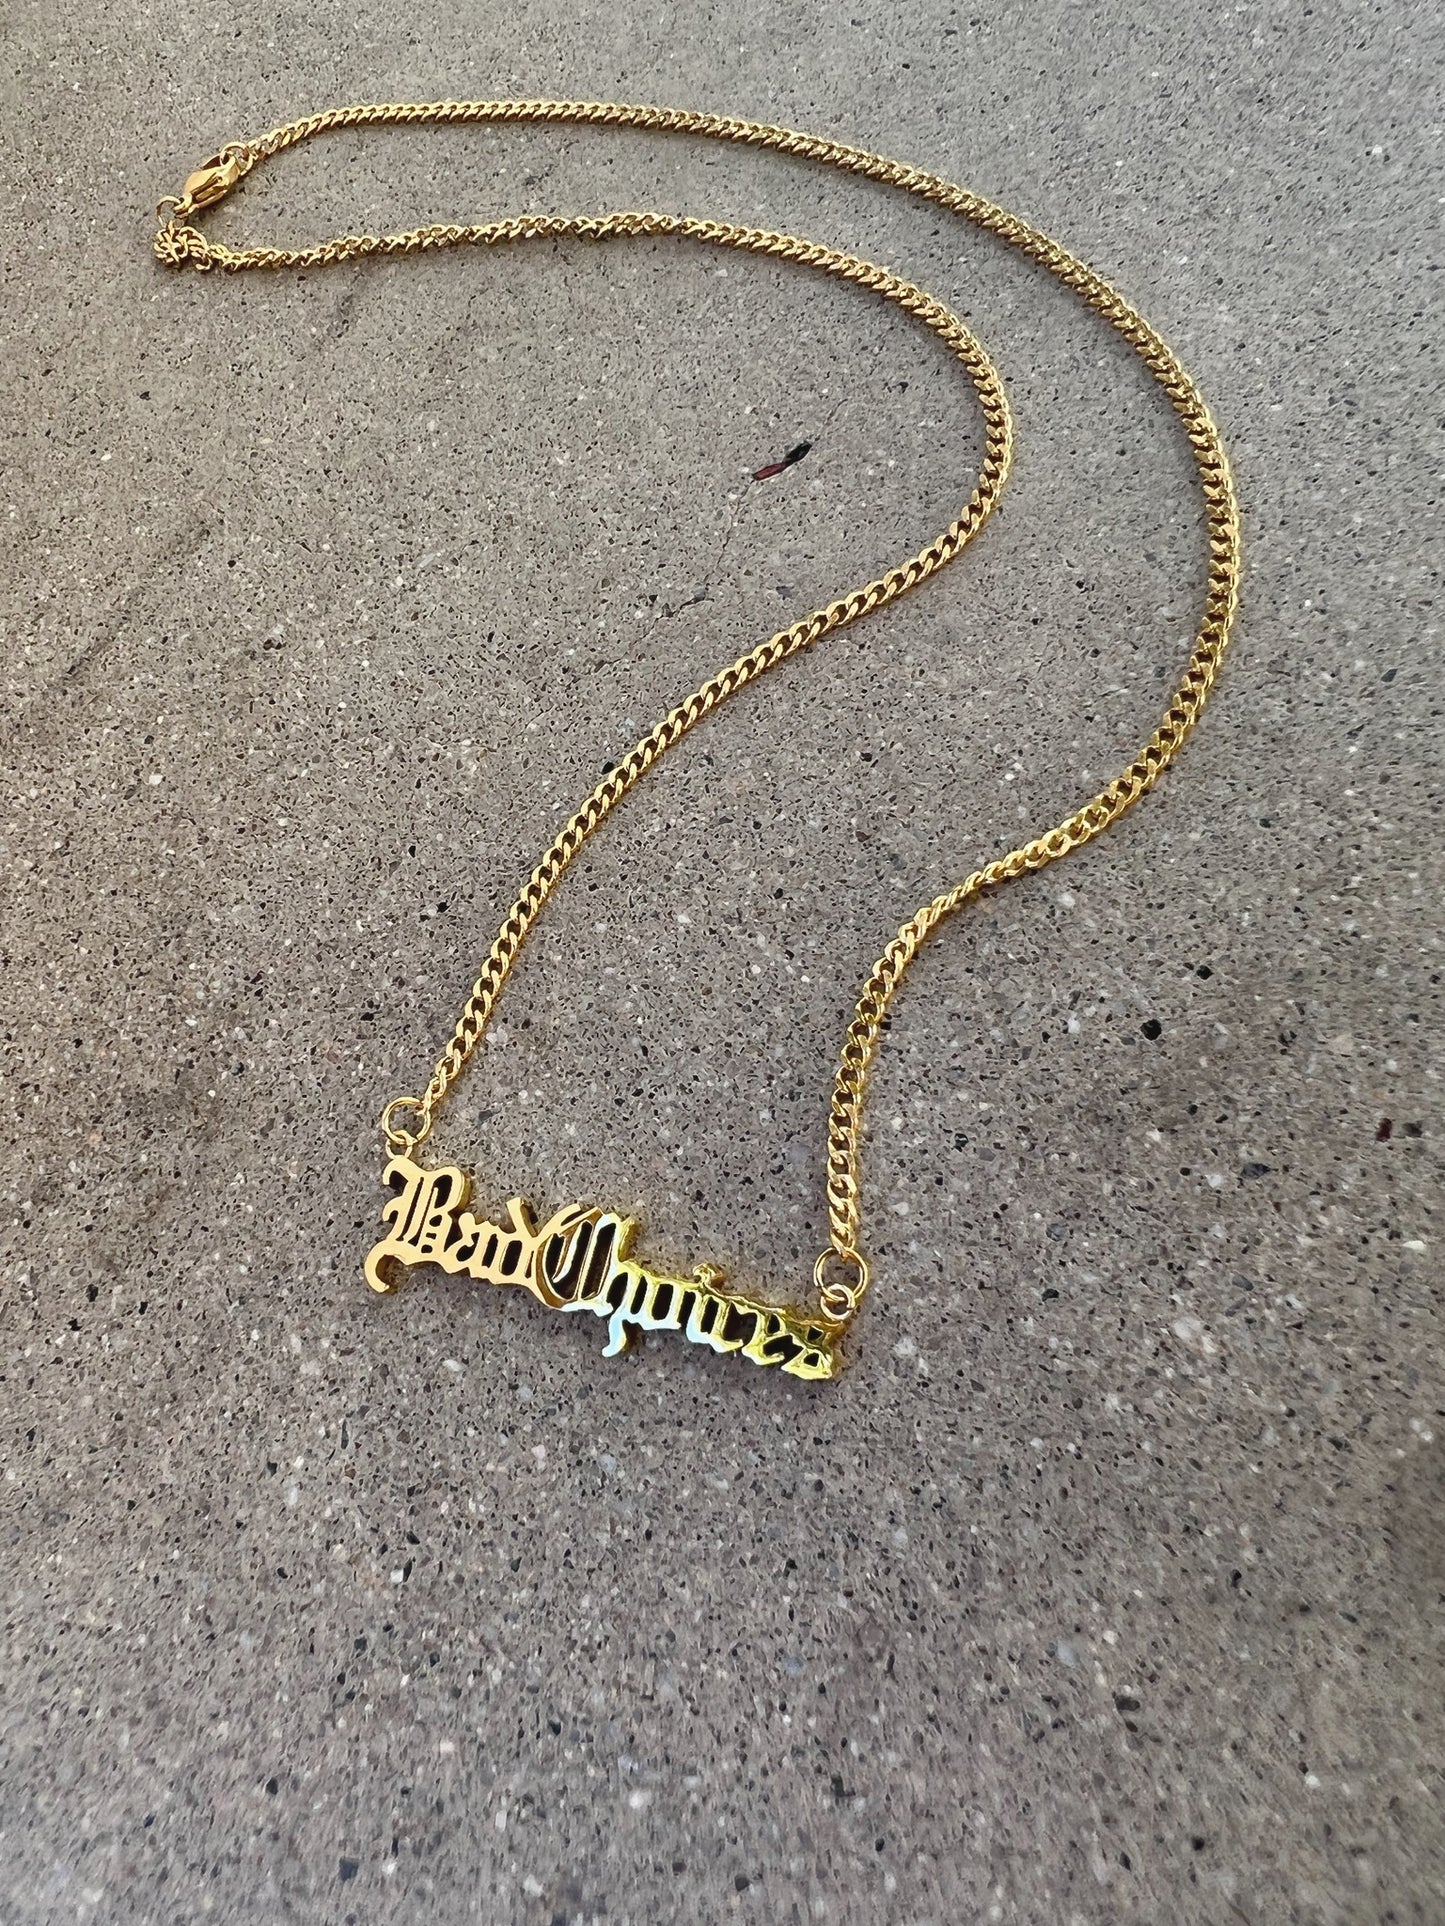 Bad Choices Necklace